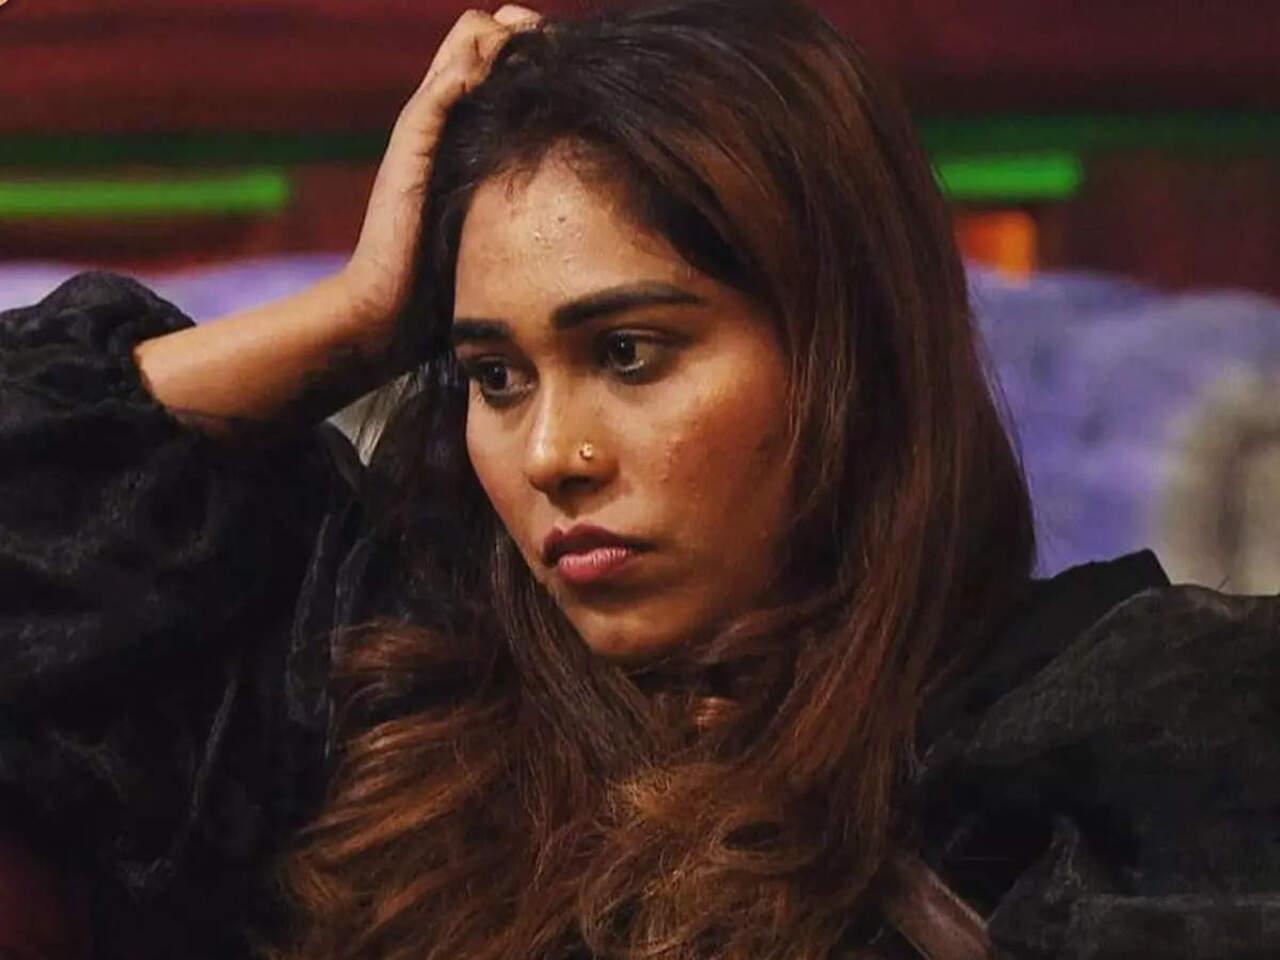 Afsana Khan was asked to leave the Bigg Boss 15 house because she had a huge fight with Rajiv Adatia and decided to pick up a knife and threaten to harm herself